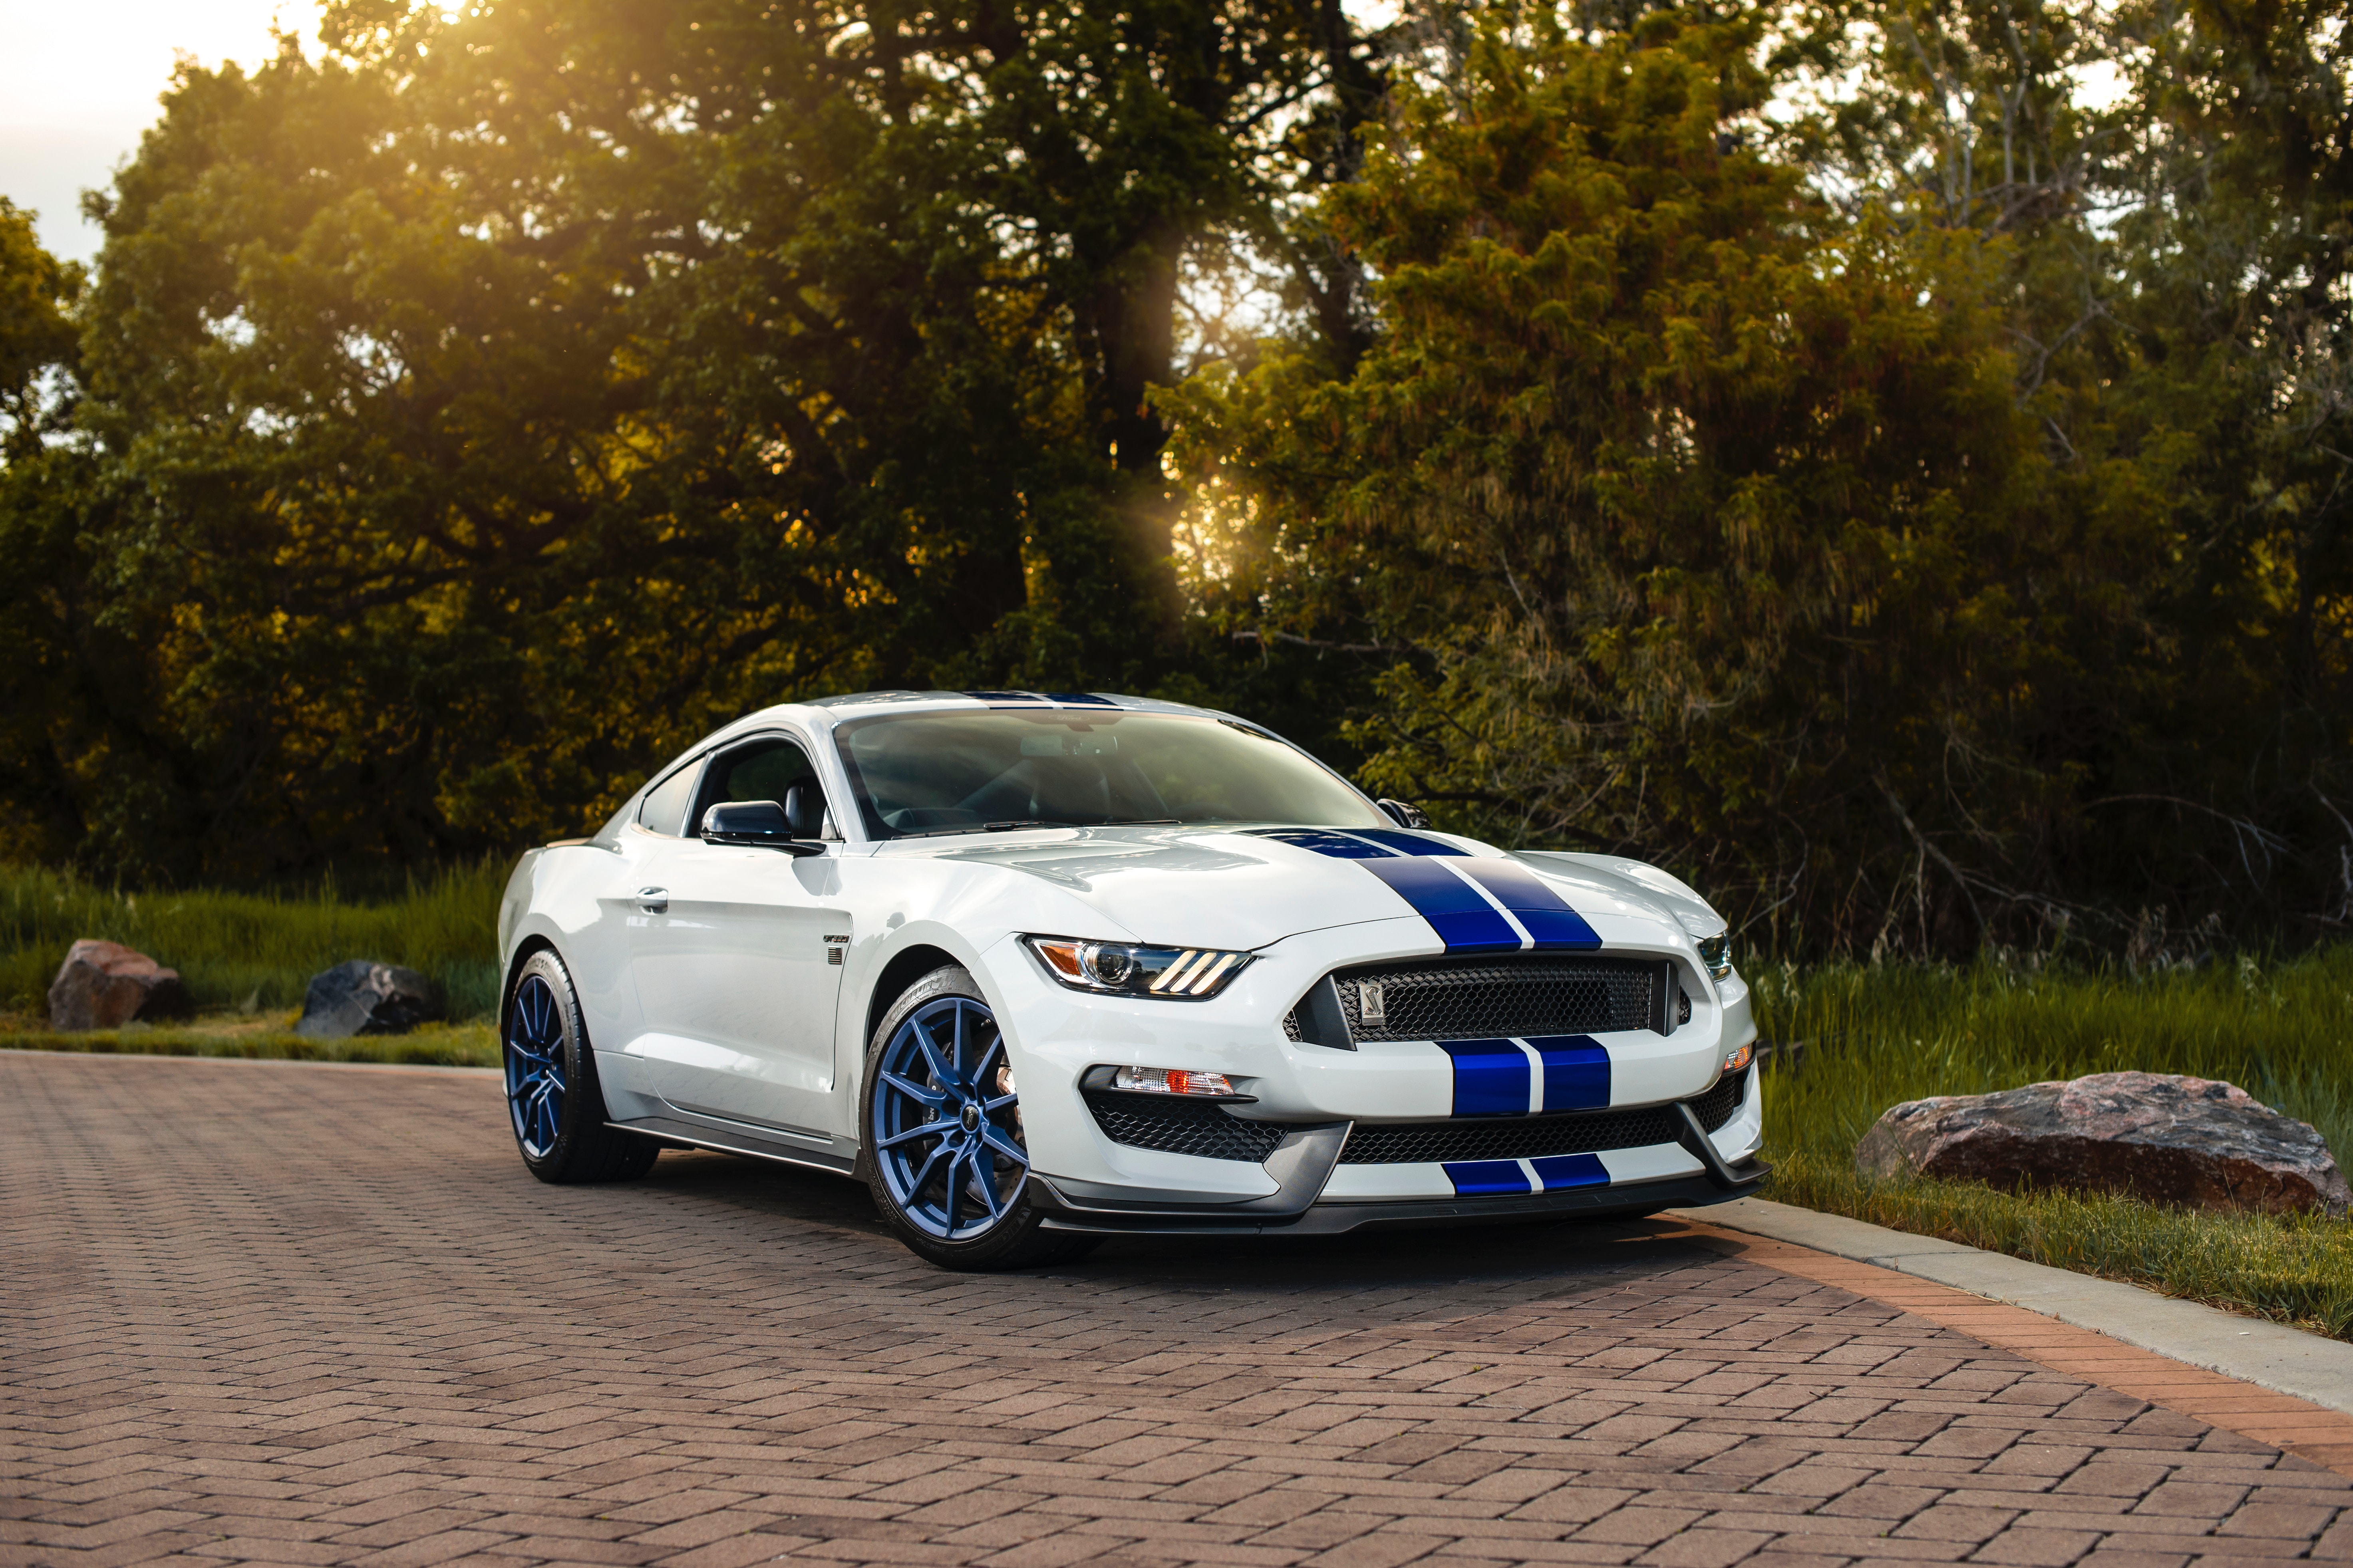 Best Ford Mustang Gt350 Background for mobile